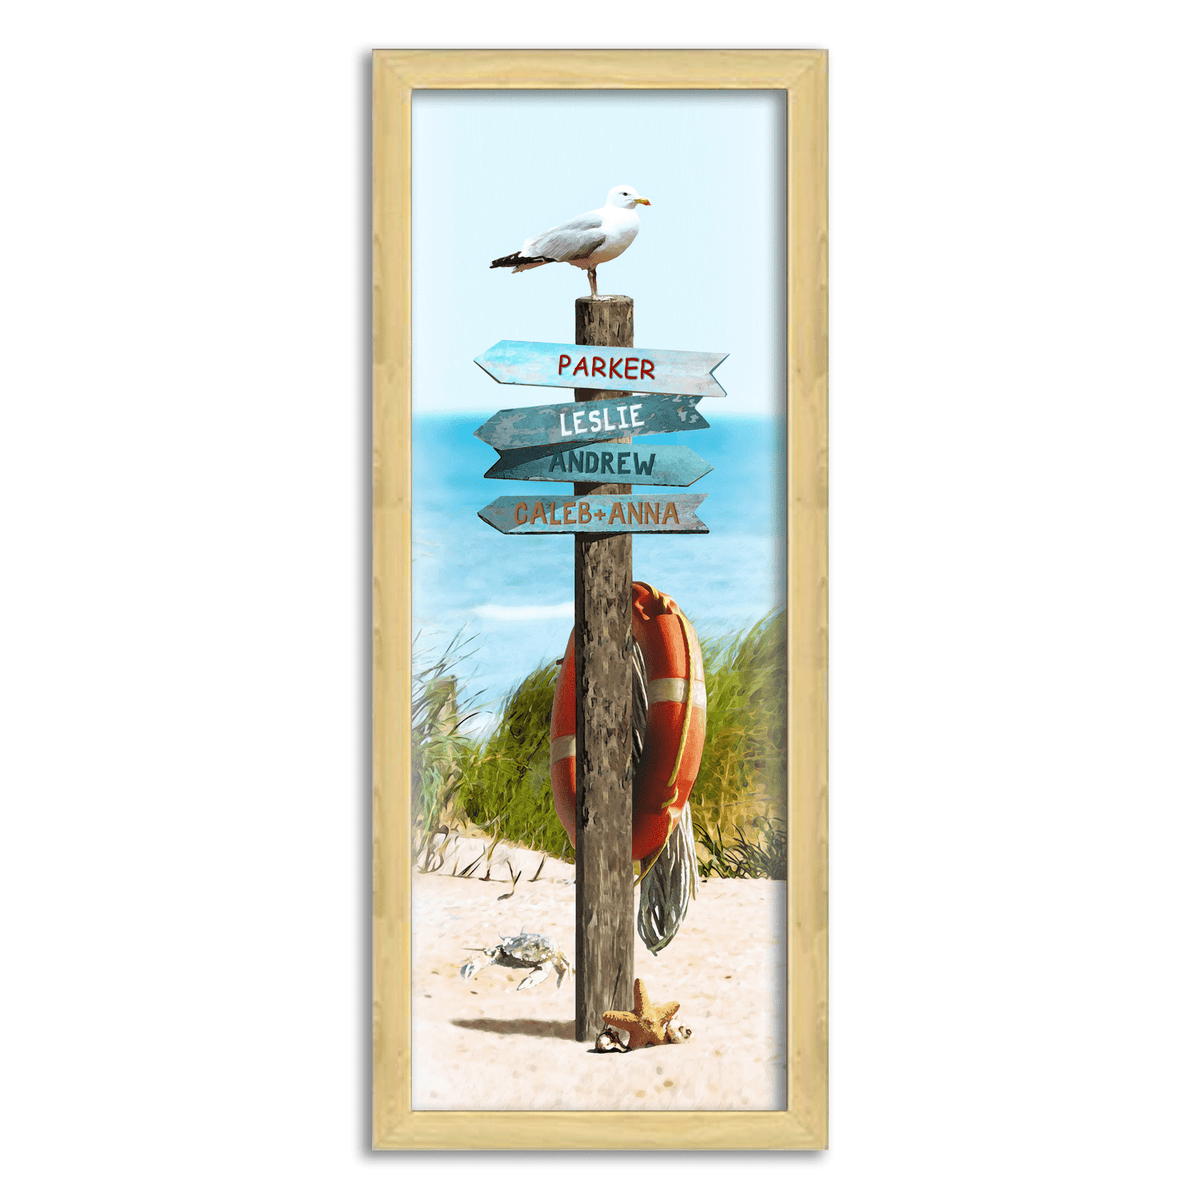 Framed Ocean Coastal Art that includes your personalized names on the signs